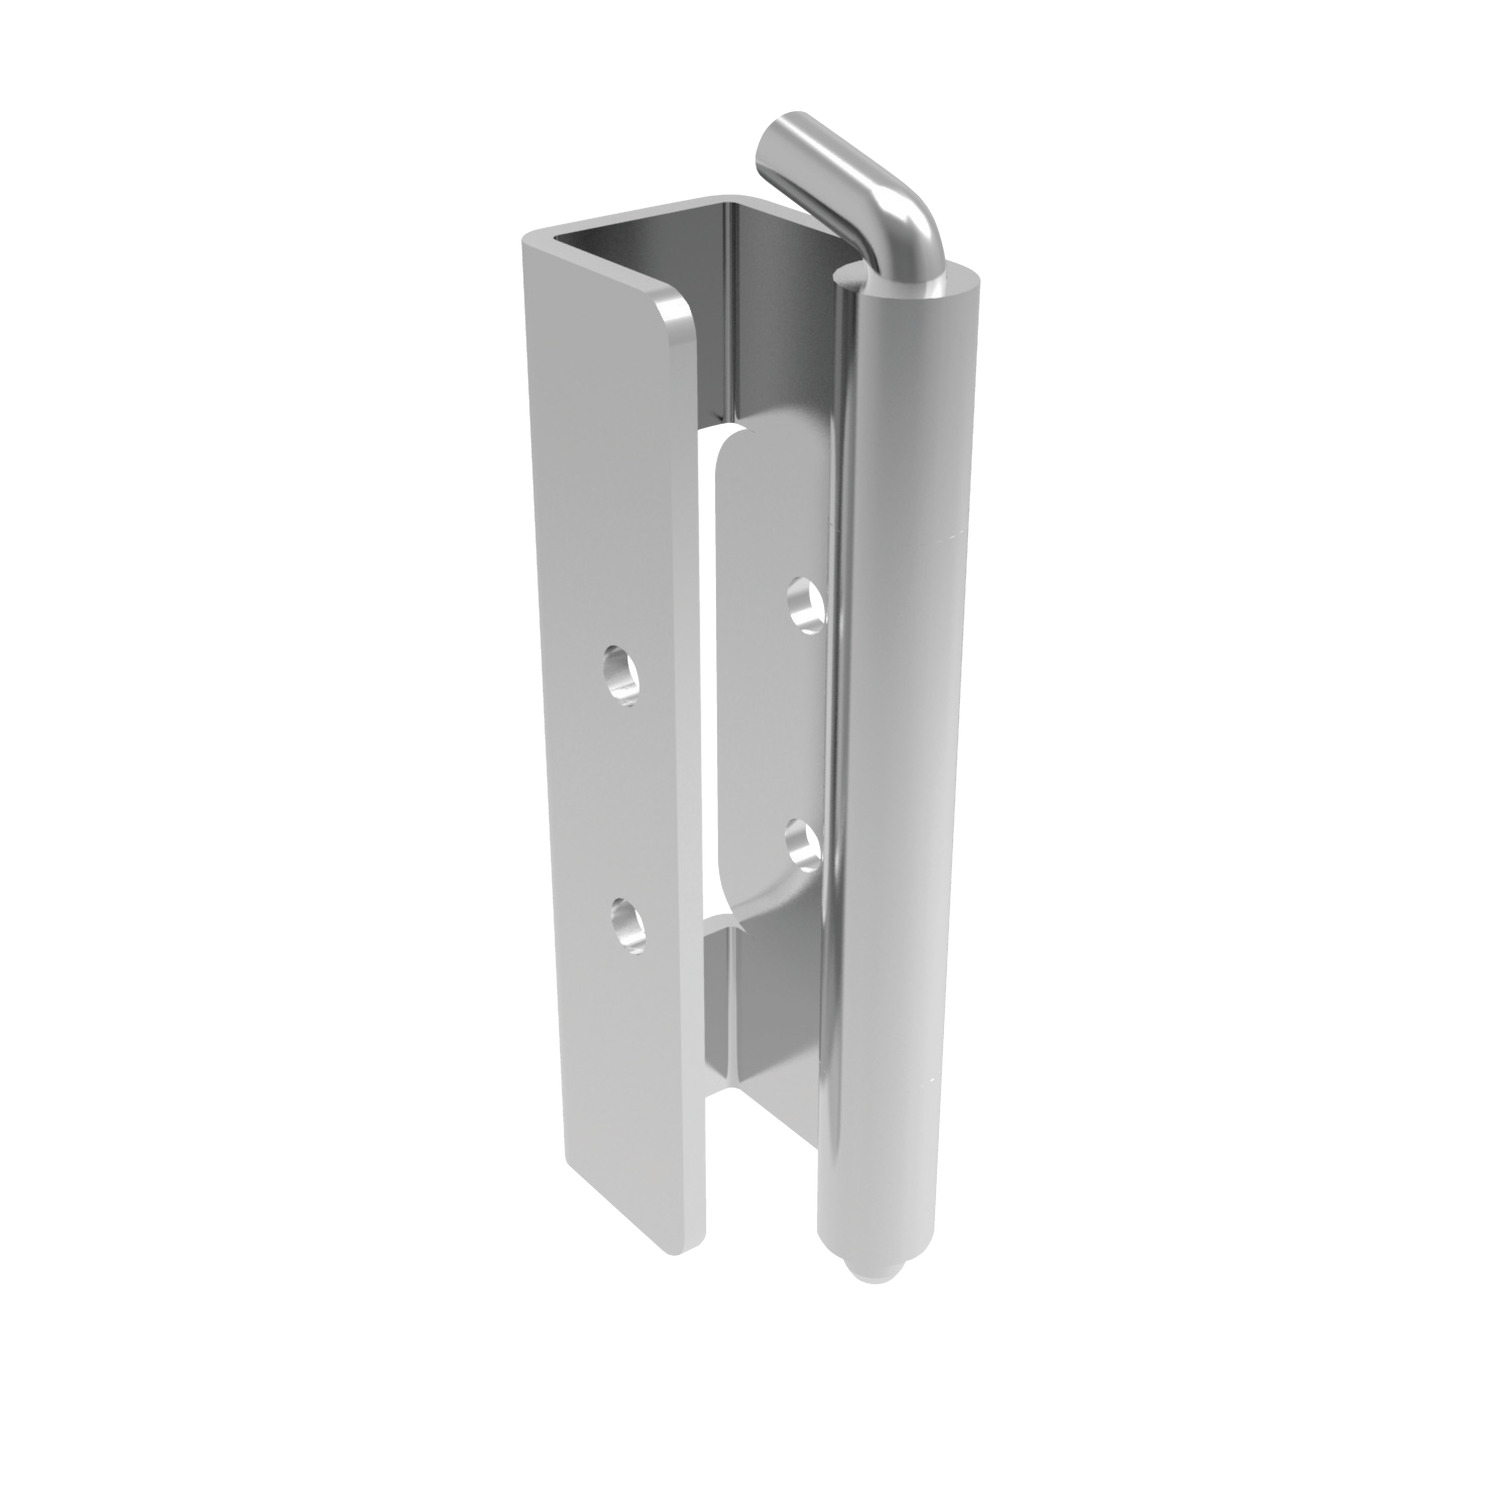 S2156 Concealed Pivot Hinges - Lift Off